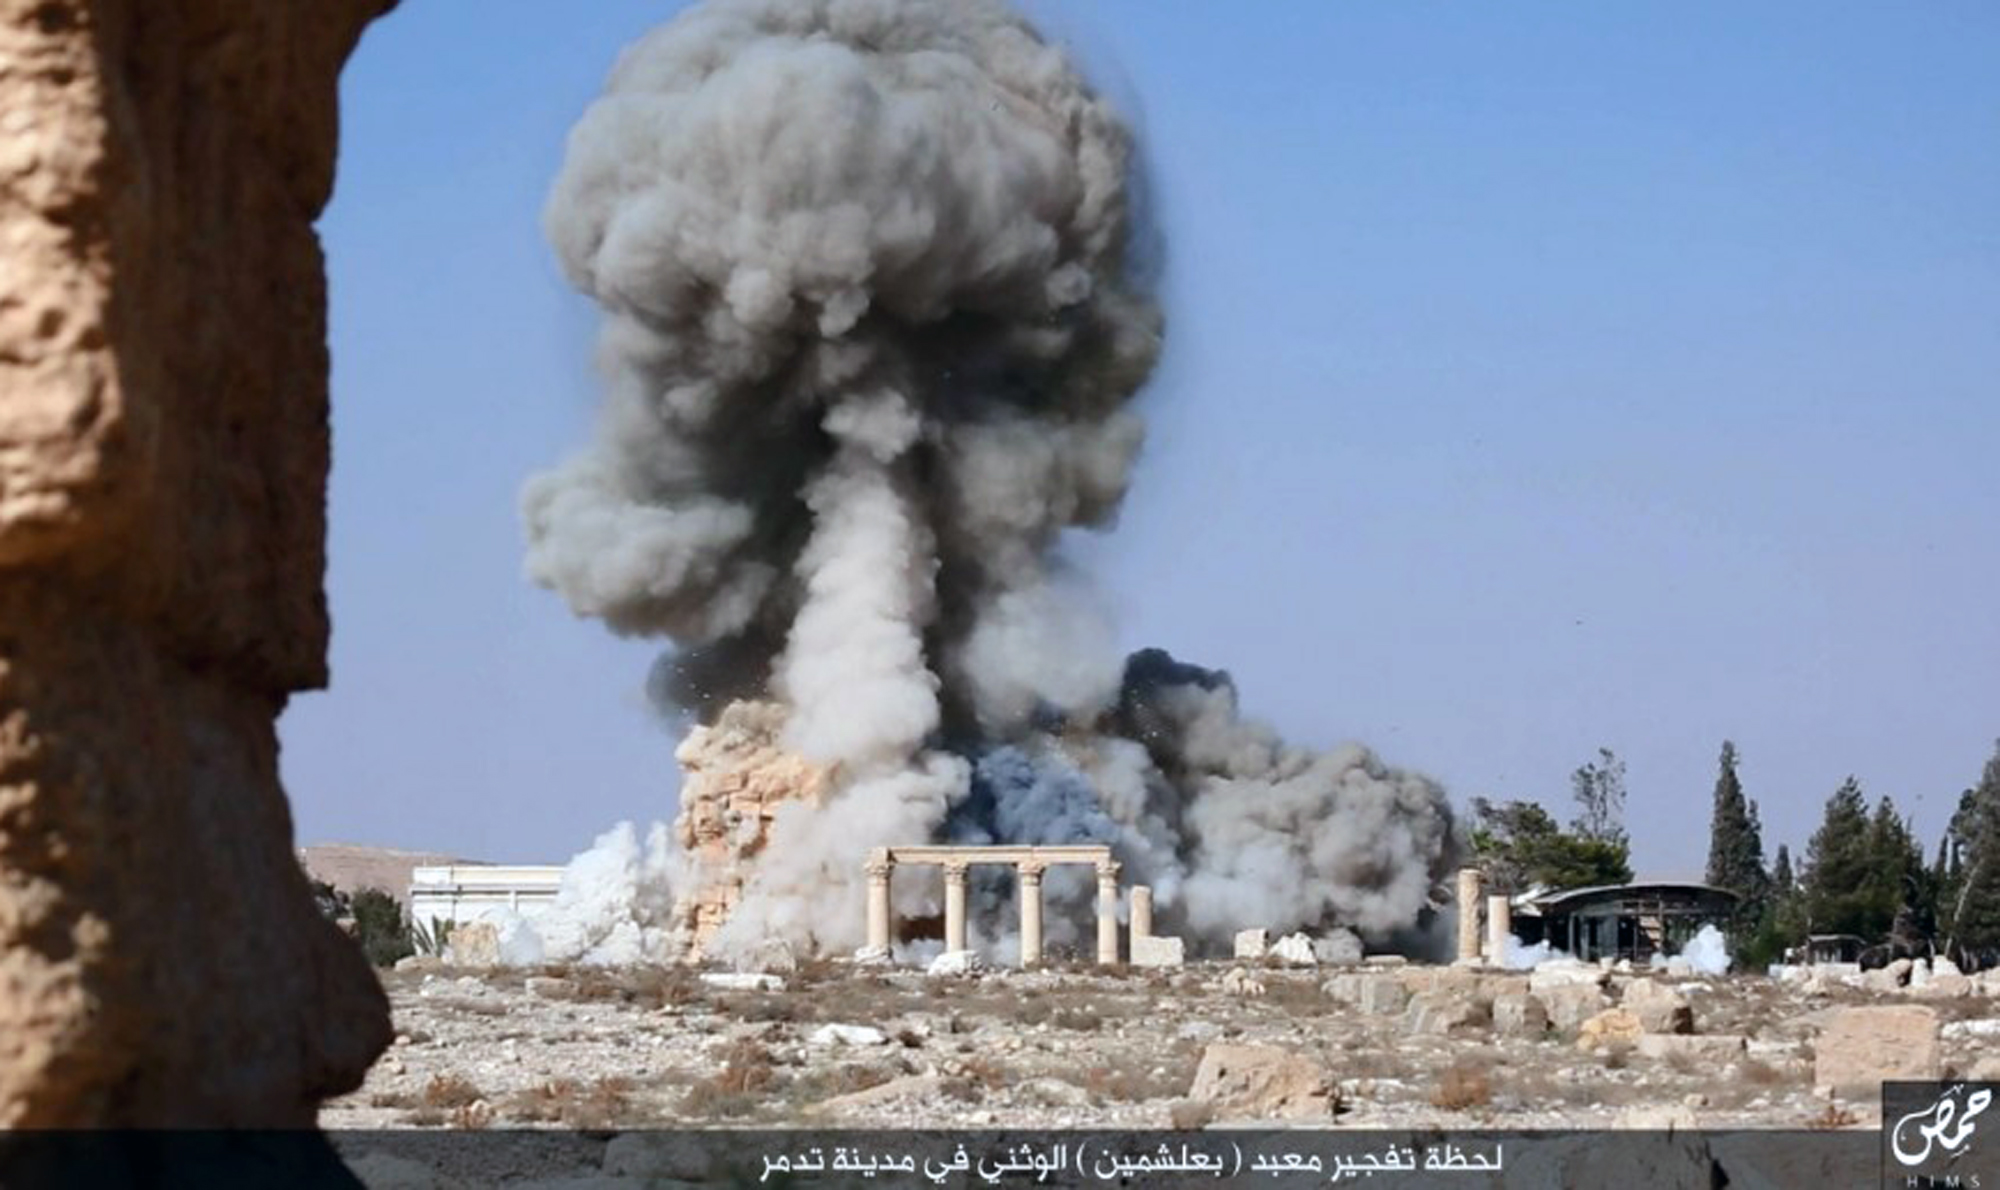 PHOTO: An undated photo released Aug. 25, 2015 on a social media site used by Islamic State militants purports to show smoke from the detonation of the 2,000-year-old temple of Baalshamin in Syria's ancient caravan city of Palmyra.